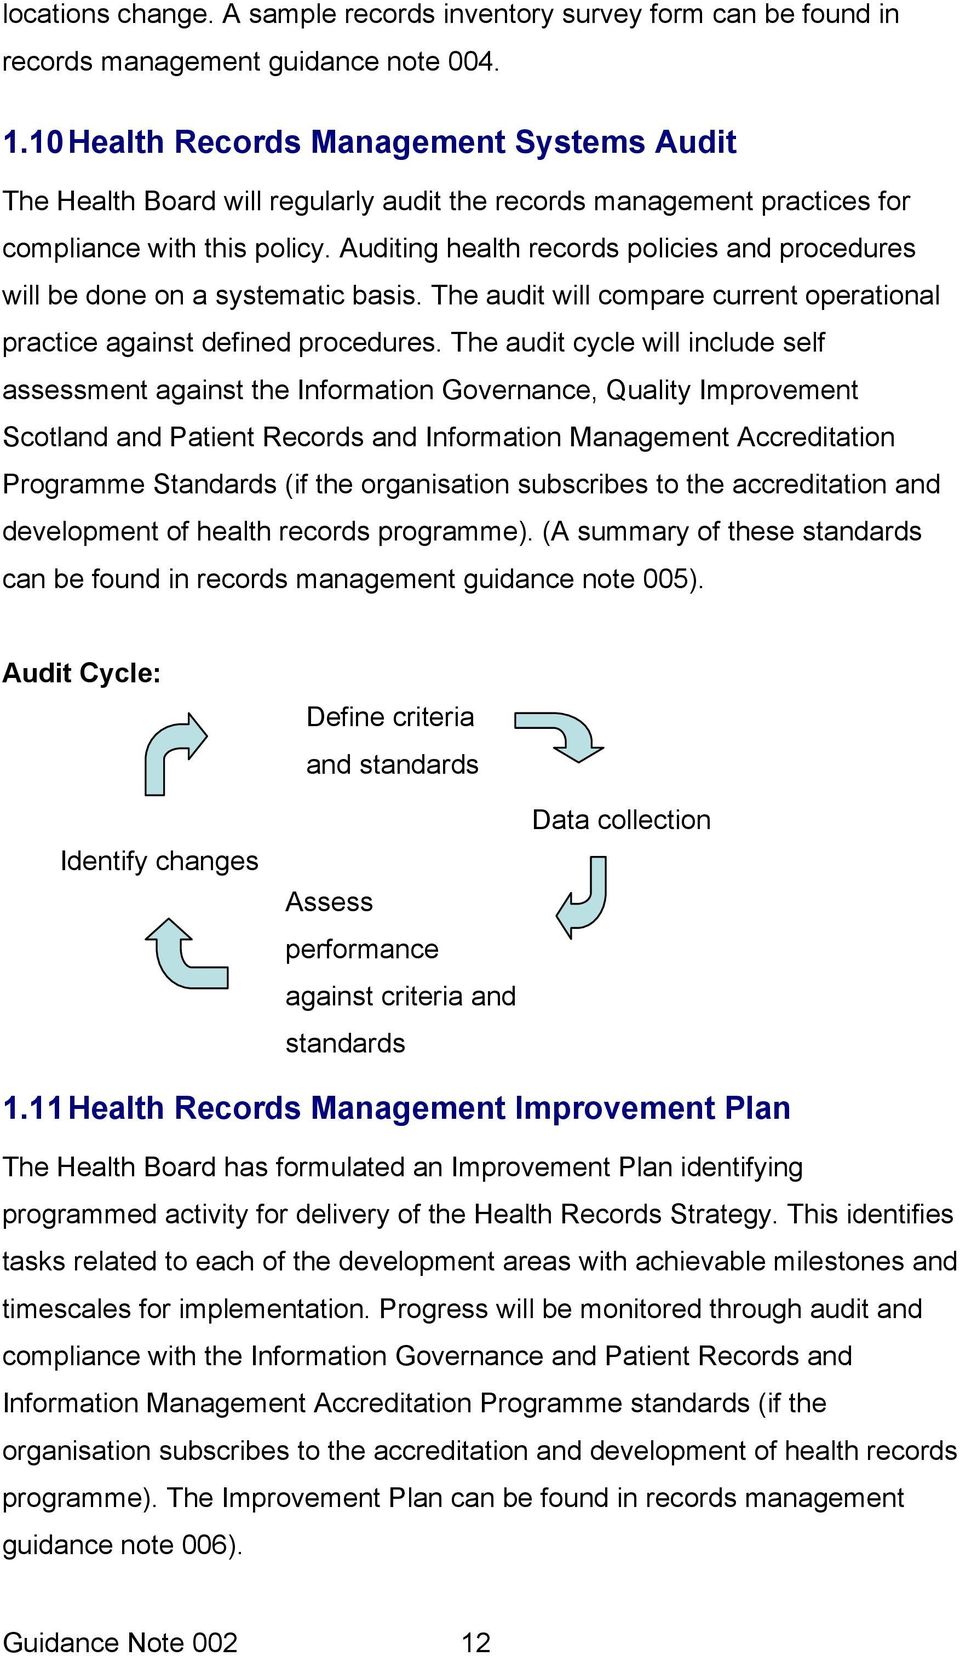 Auditing health records policies and procedures will be done on a systematic basis. The audit will compare current operational practice against defined procedures.